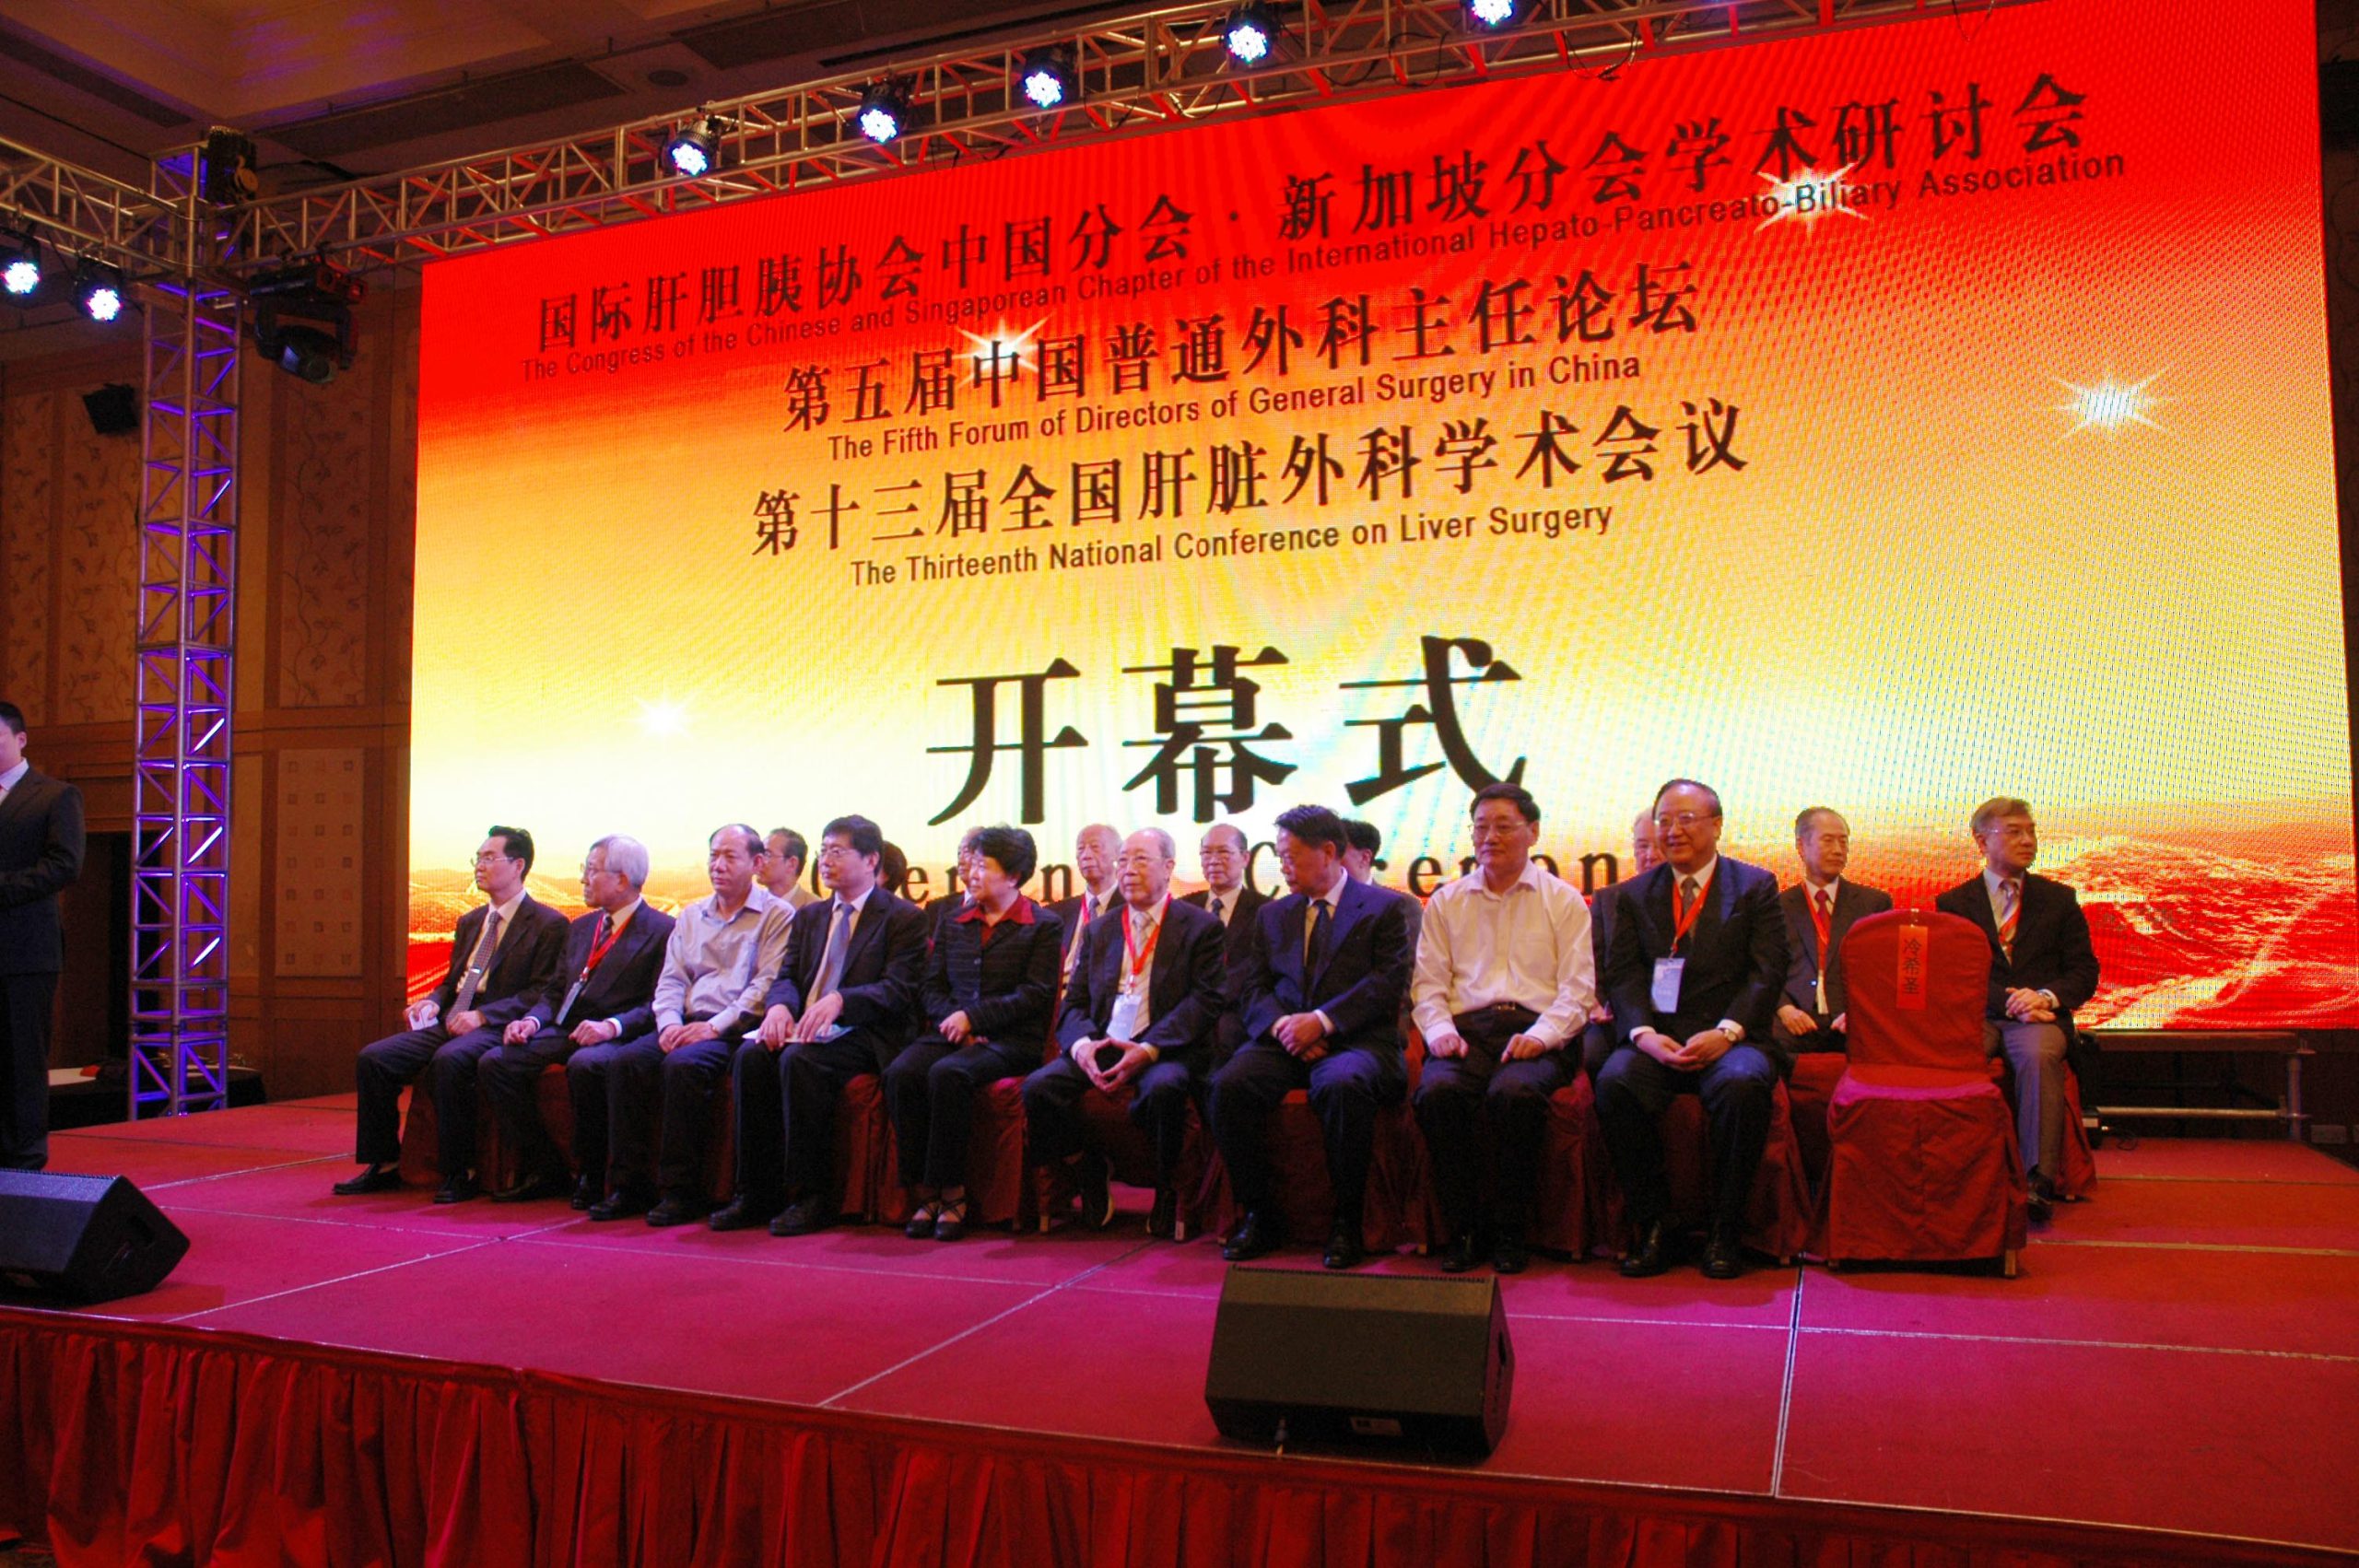 The 4th Academic Conference of the International Hepatobiliary and Pancreatic Association, China Chapter